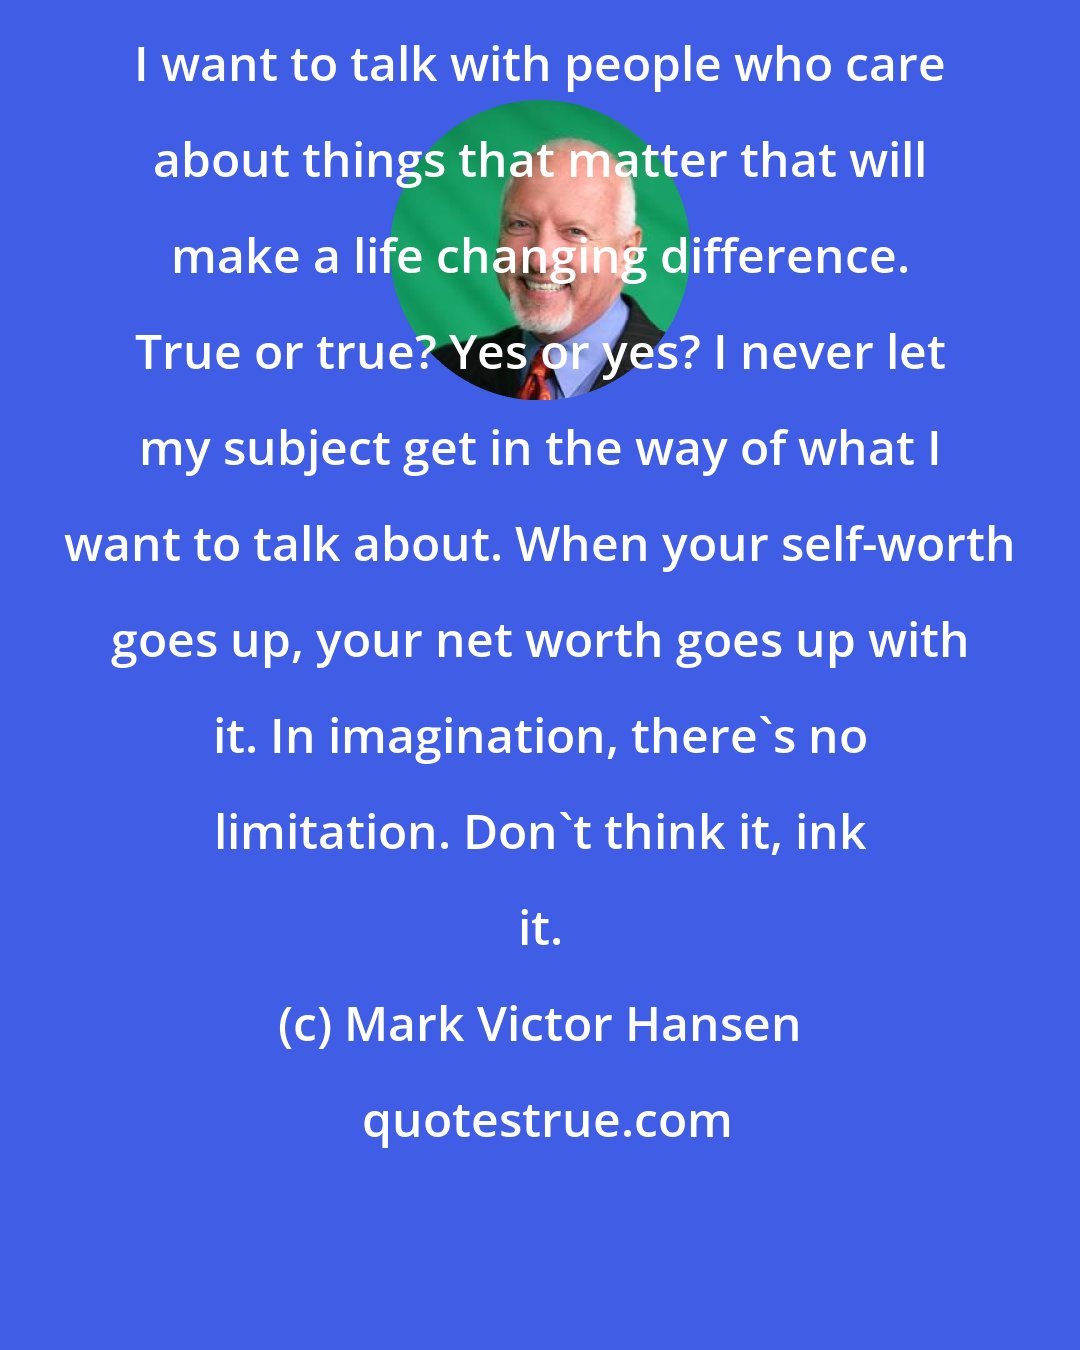 Mark Victor Hansen: I want to talk with people who care about things that matter that will make a life changing difference. True or true? Yes or yes? I never let my subject get in the way of what I want to talk about. When your self-worth goes up, your net worth goes up with it. In imagination, there's no limitation. Don't think it, ink it.